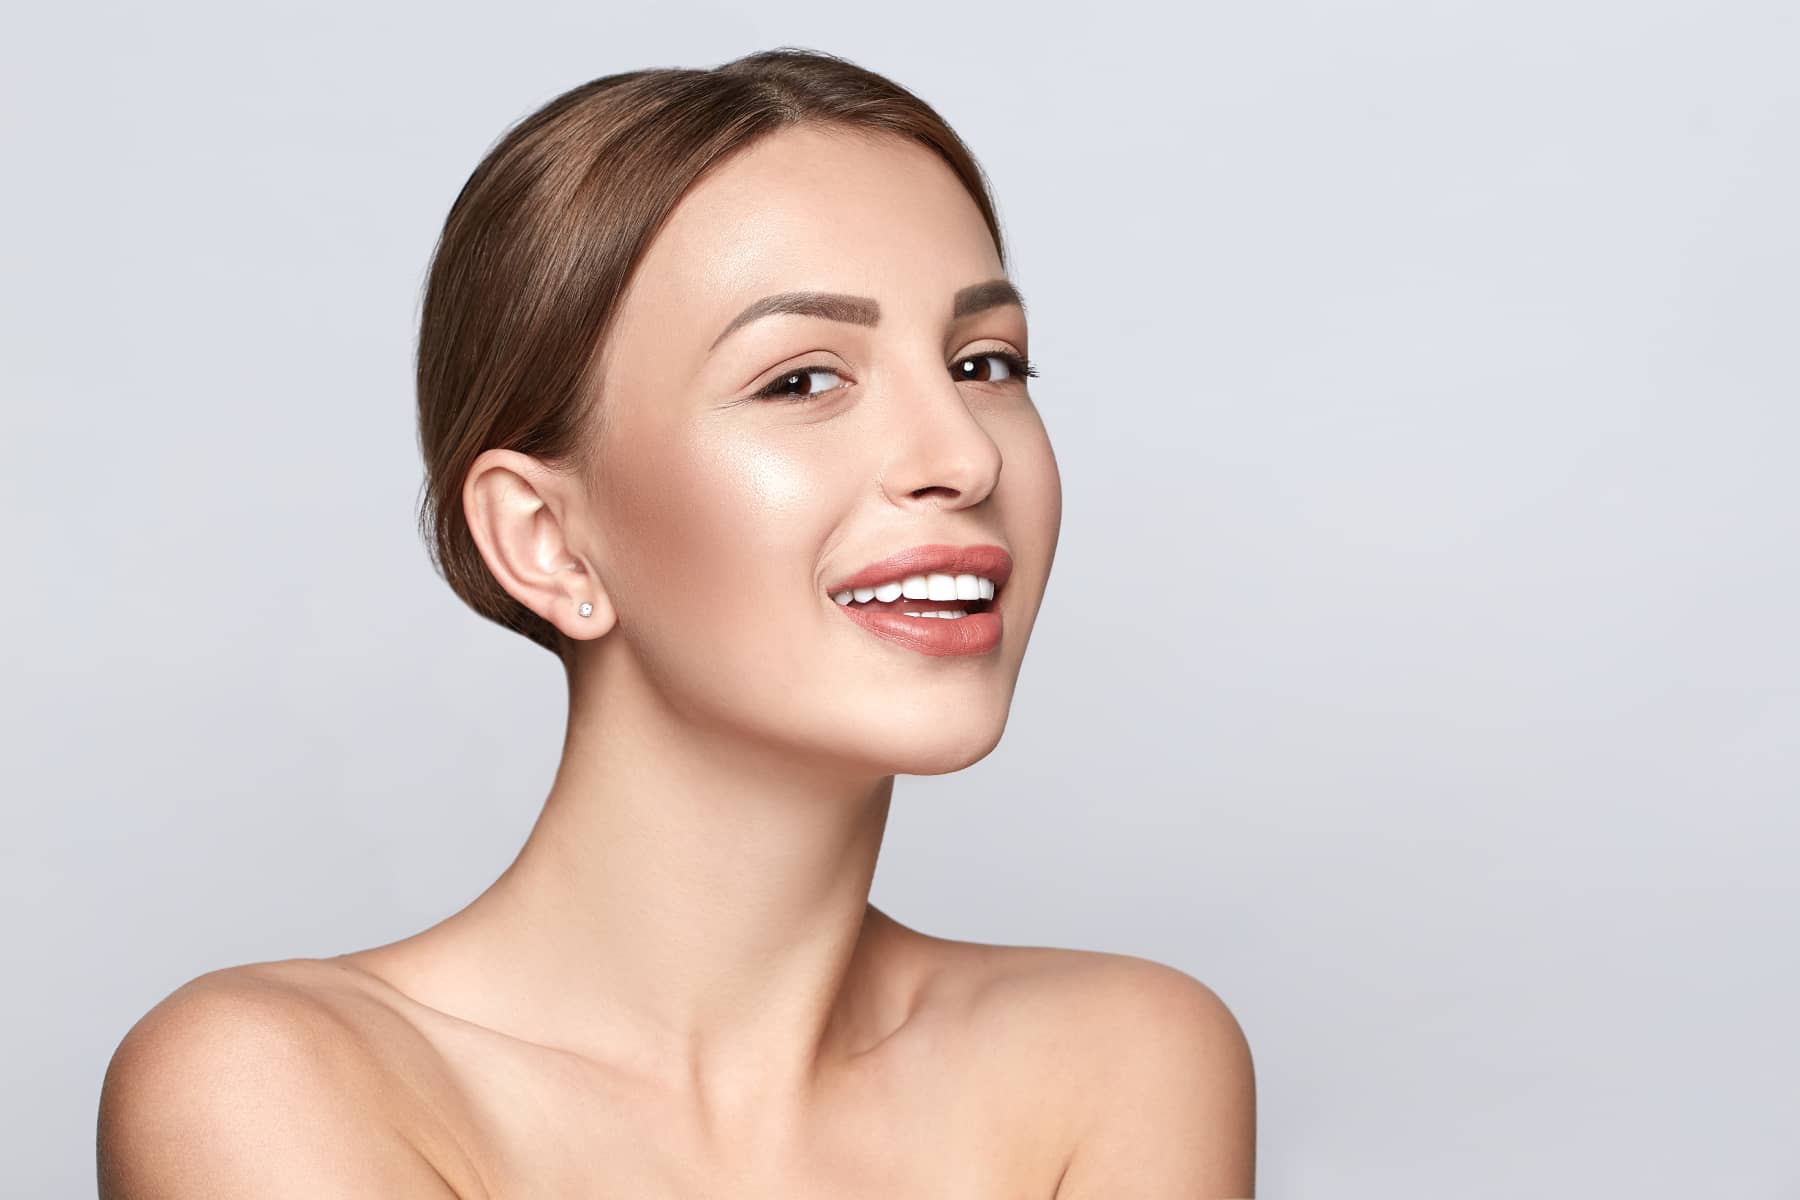 Neck Lift VS Lower Facelift– What Do I Need To Know?